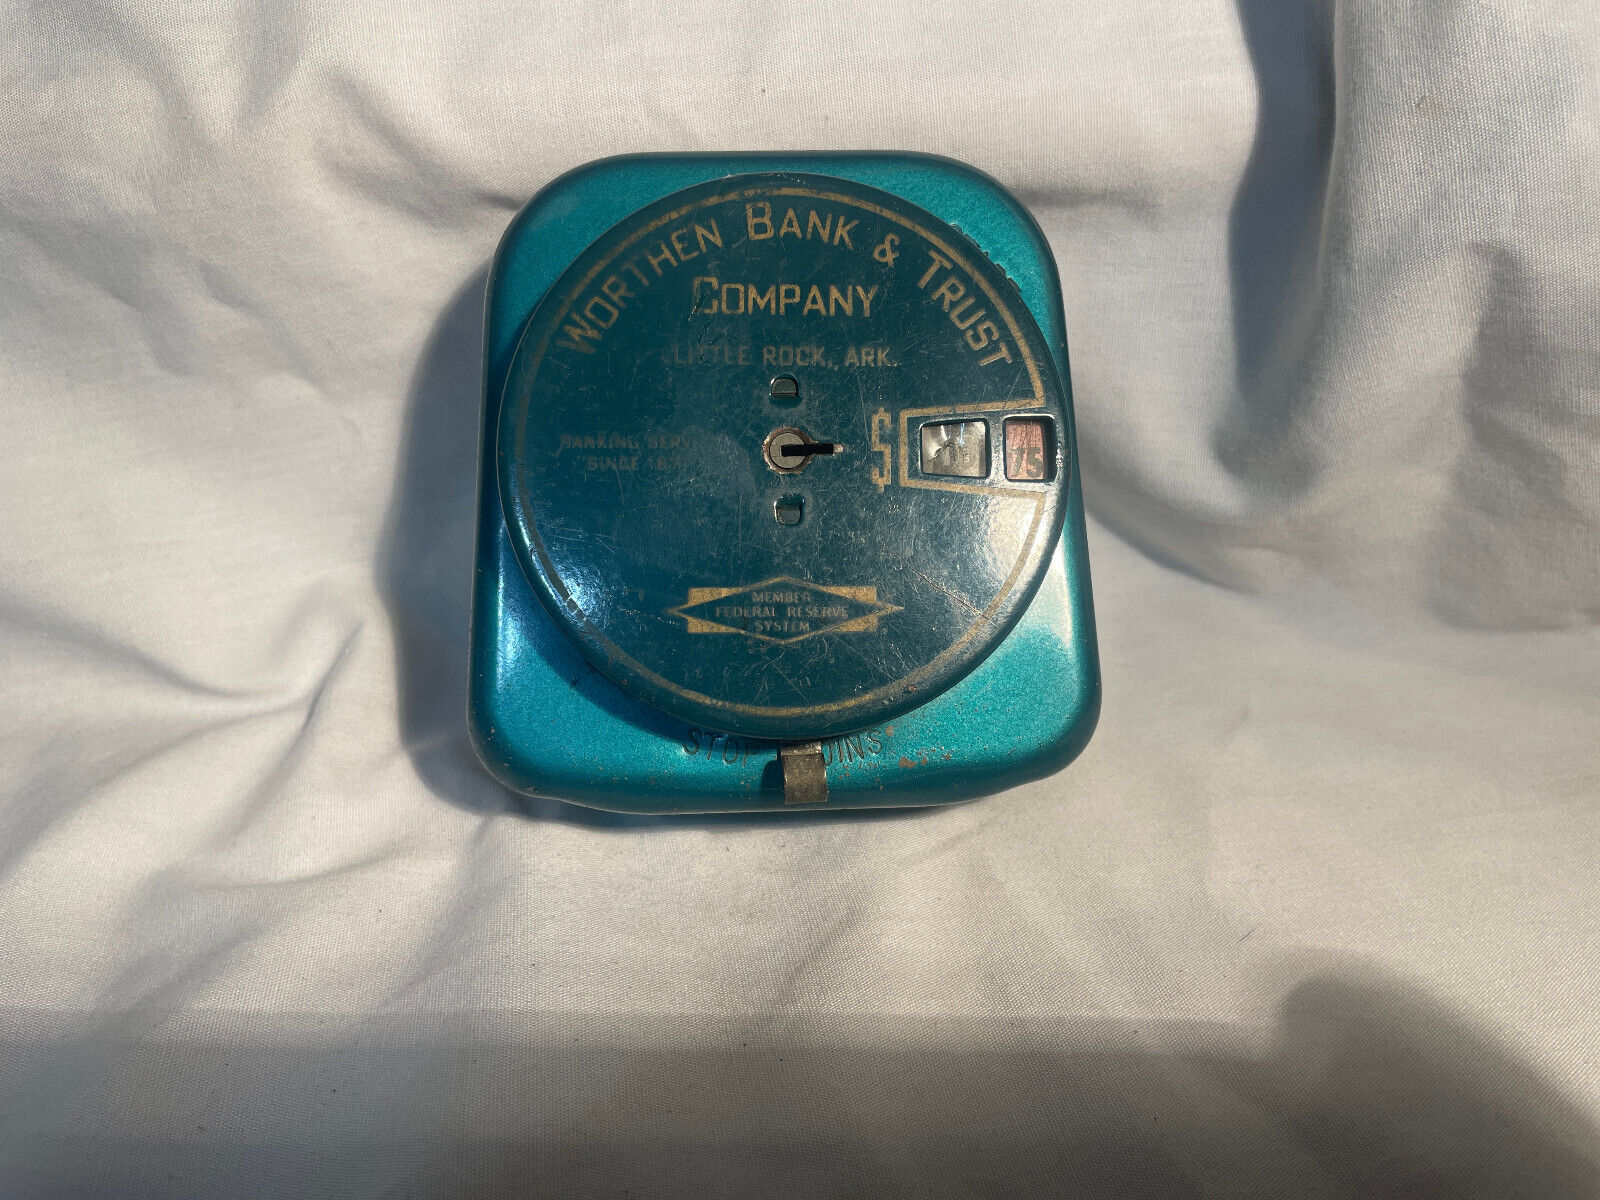 Add A Coin Bank Banker Utility Co. Northern Bank and Trust Co. Little Rock AR